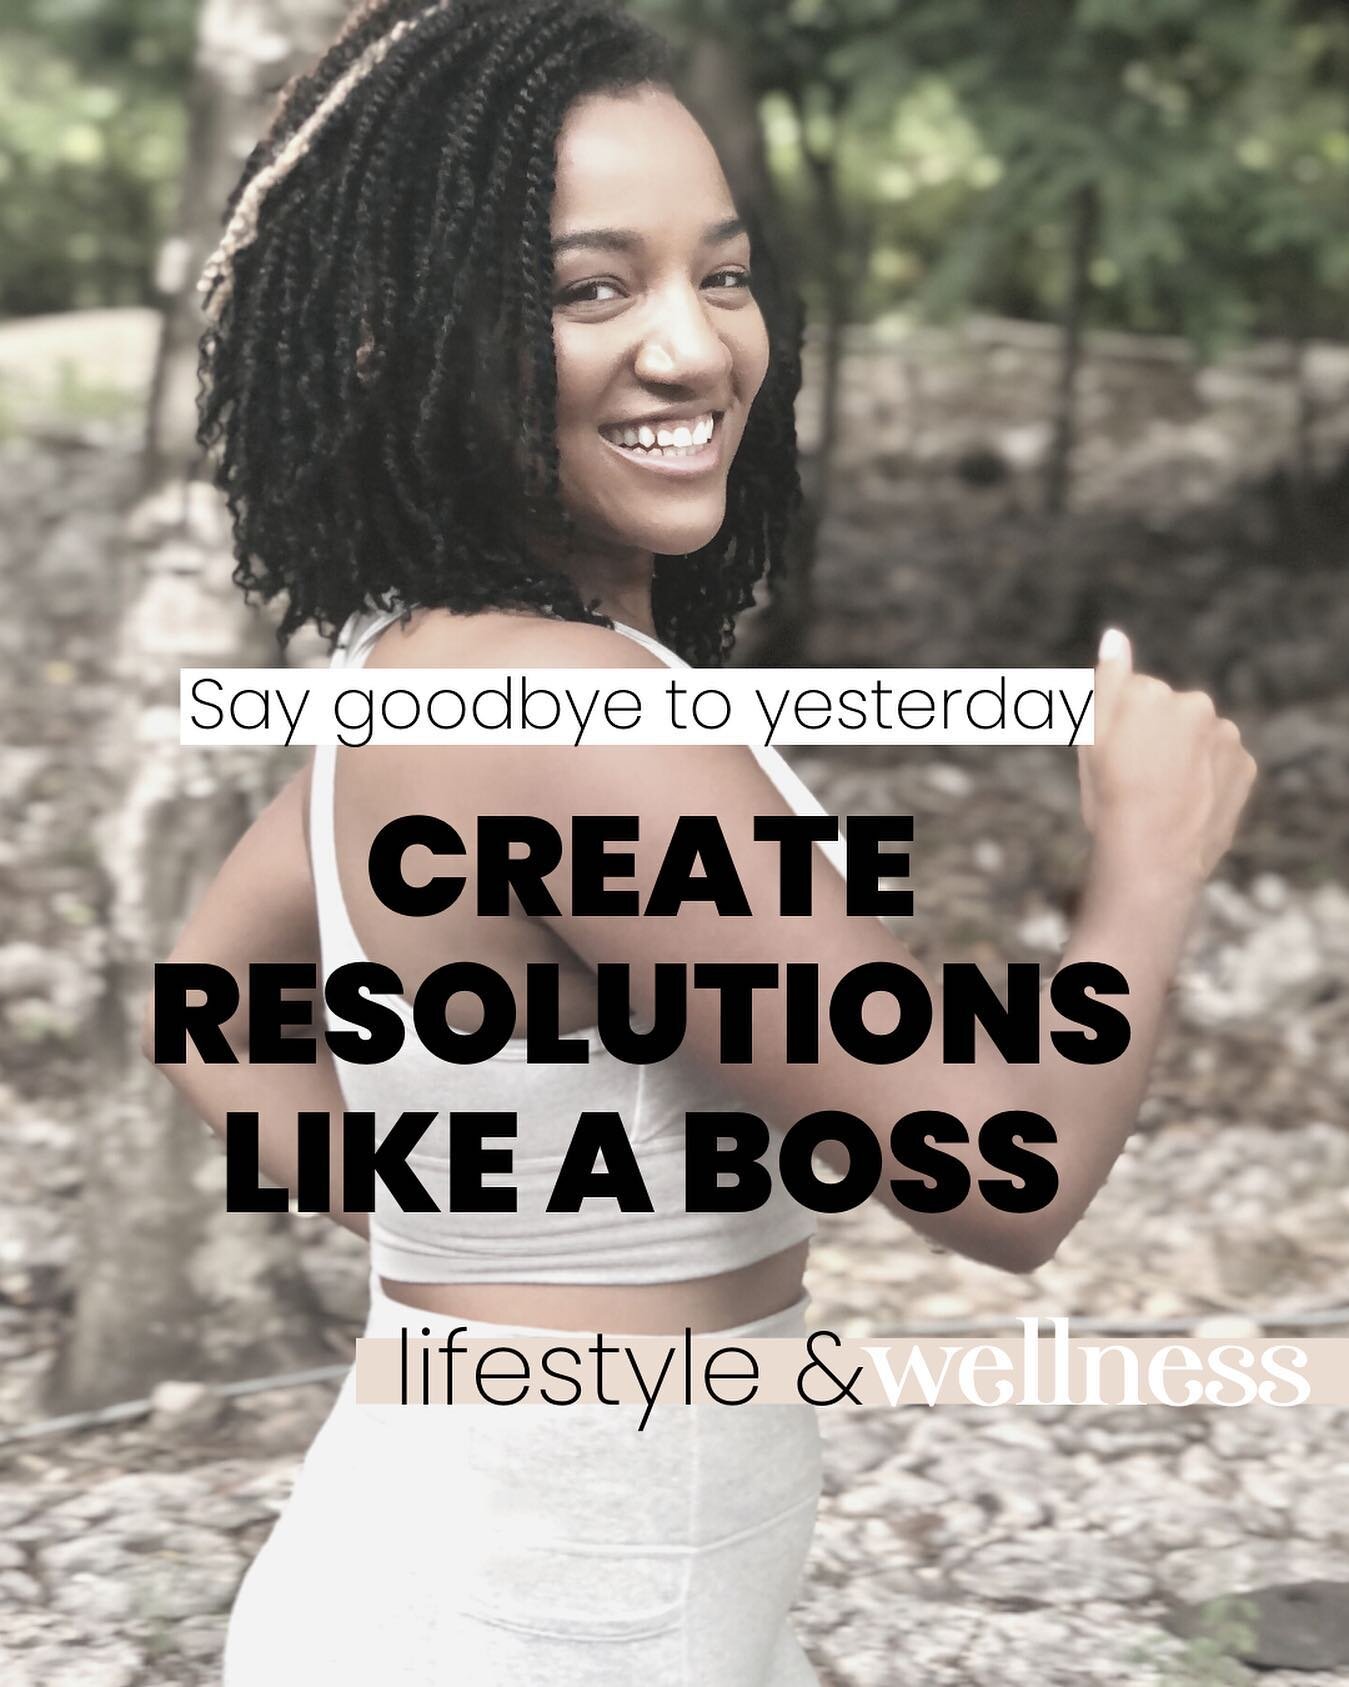 It&rsquo;s never too late to make a good resolution. But don&rsquo;t make it just to make it. Make one that&rsquo;s meaningful and will propel you into your being your best amplified self! It&rsquo;s not new year new you. Make it a new year and bette